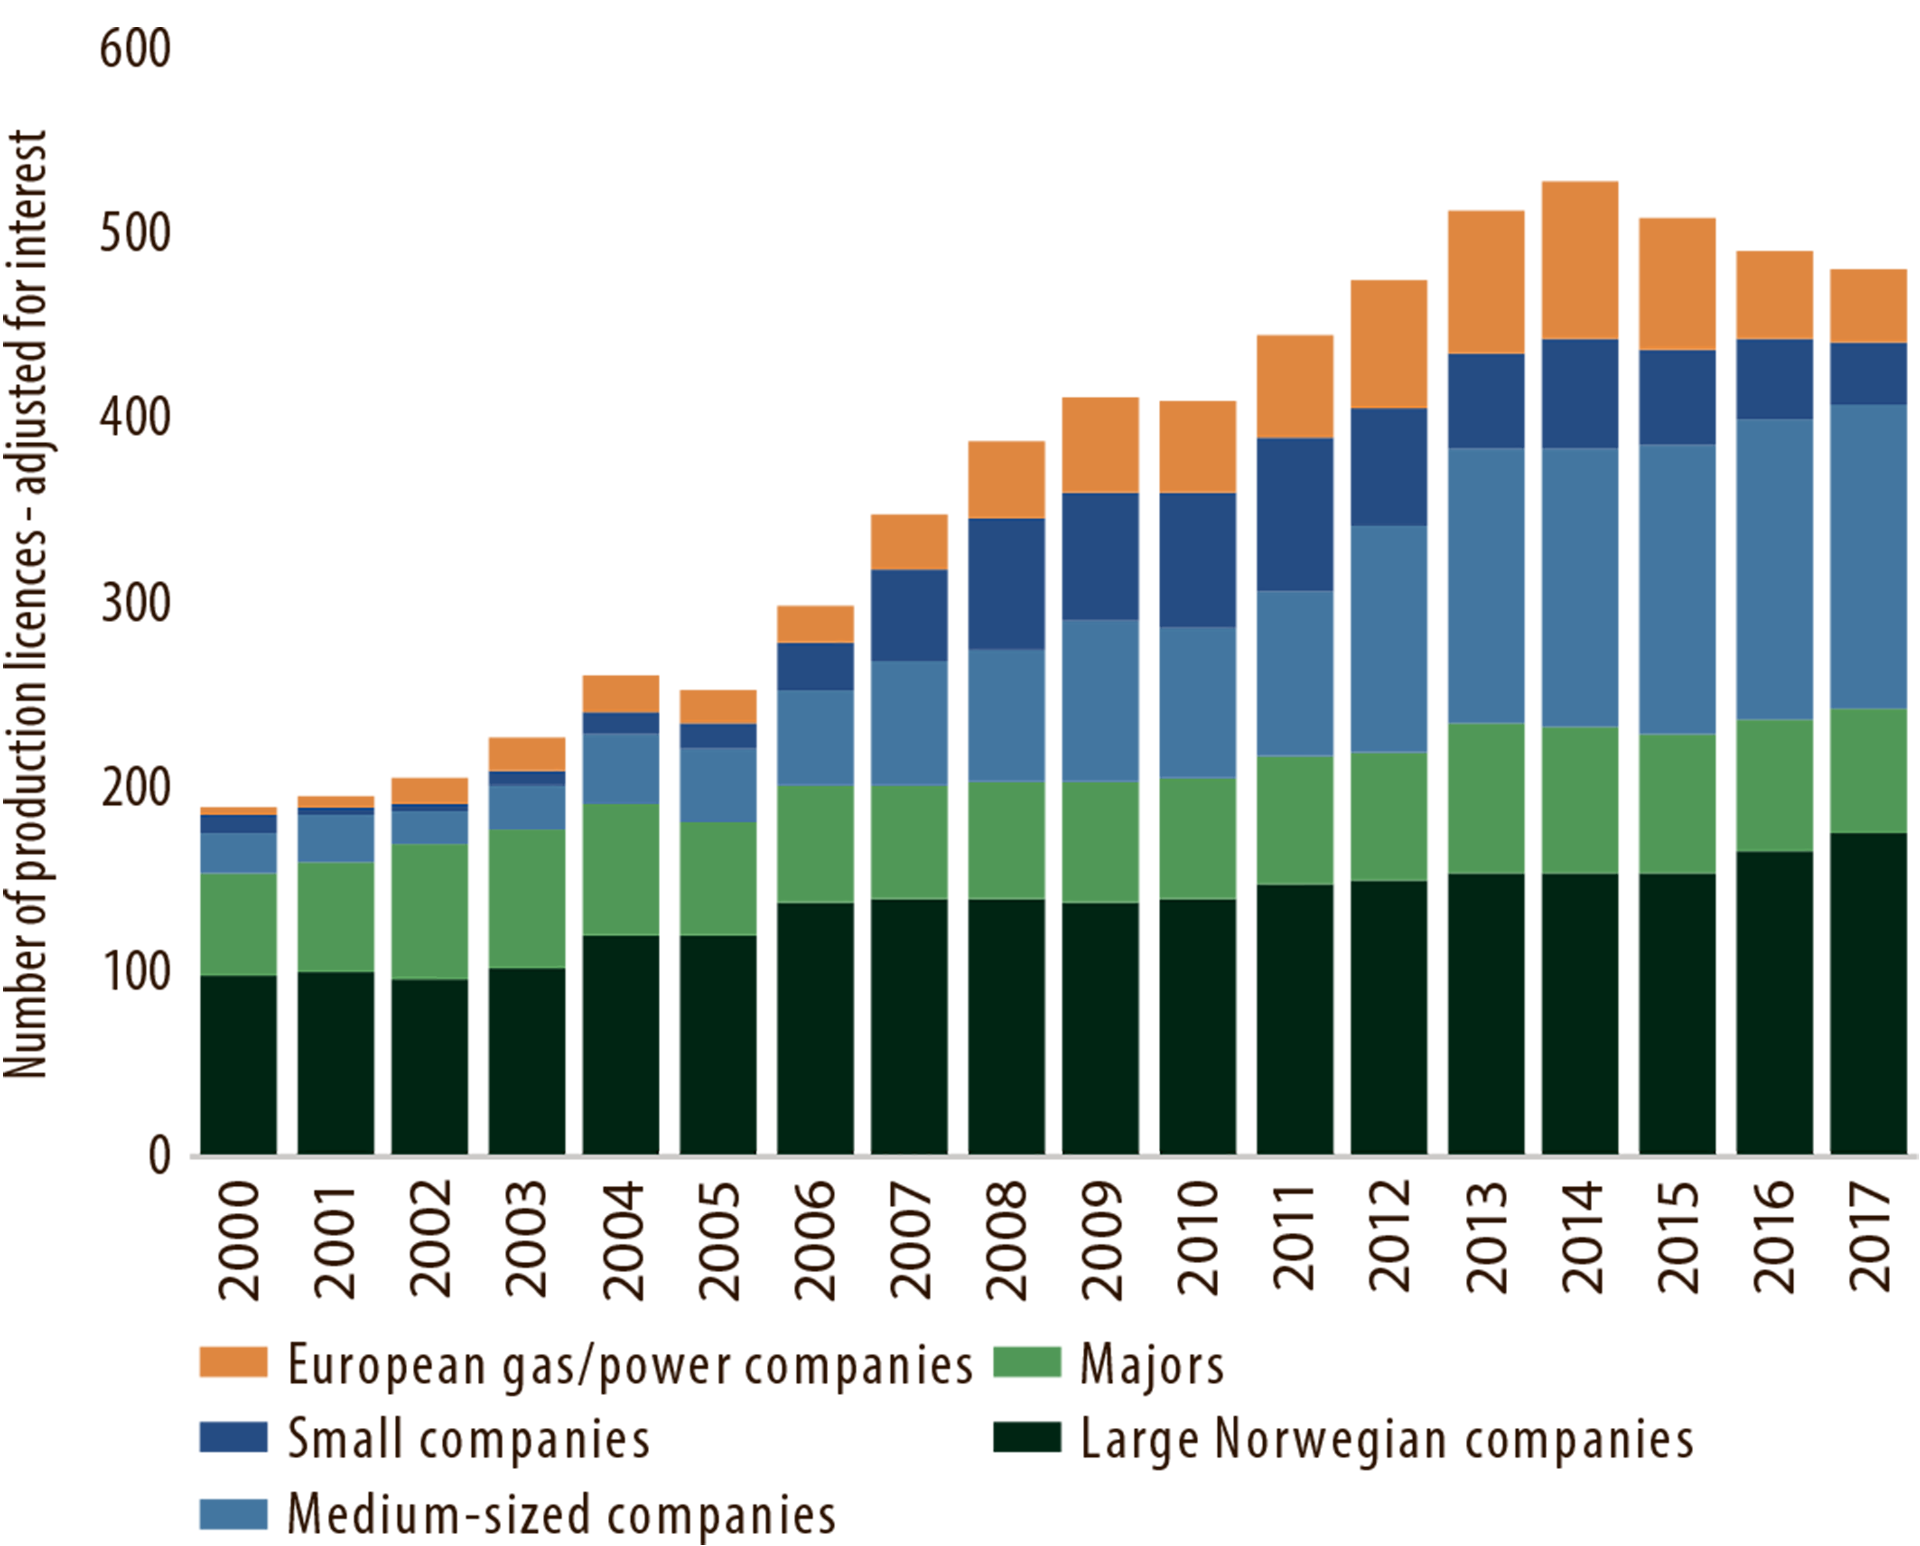 Figure 5.4 Production licences by company category in 2000-17.